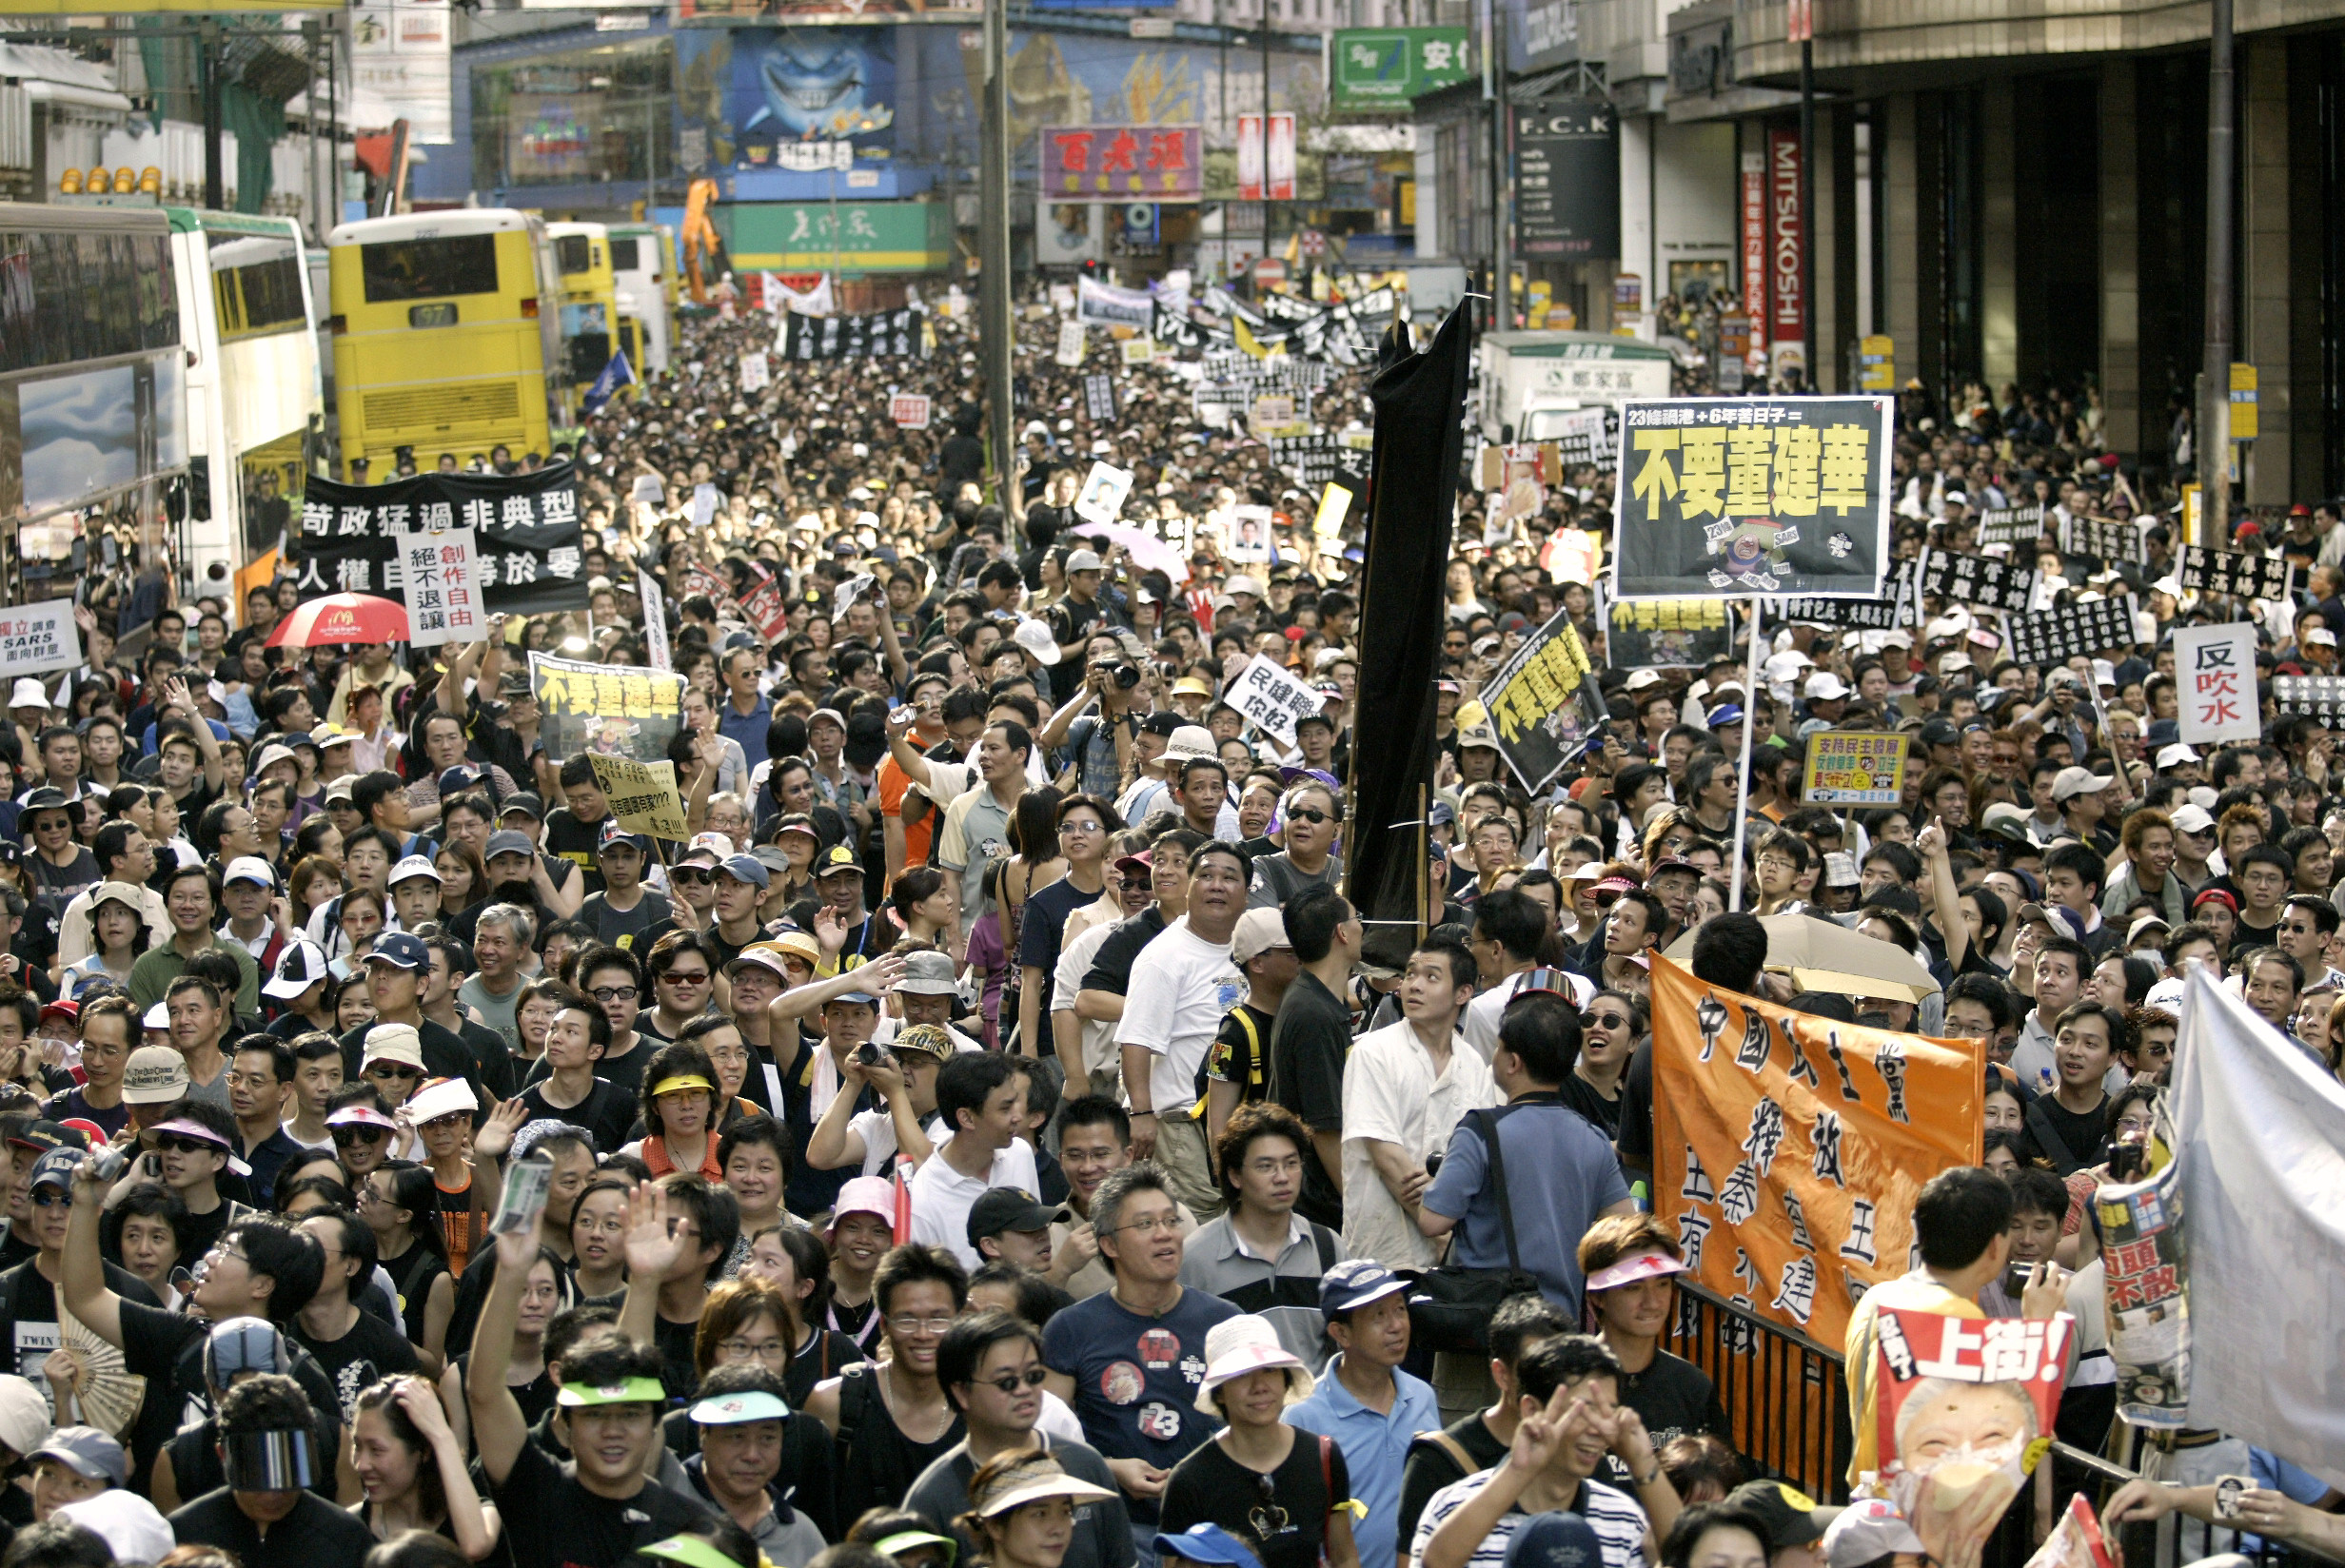 Protestors march against proposed 2003 national security legislation. Photo: Dickson Lee